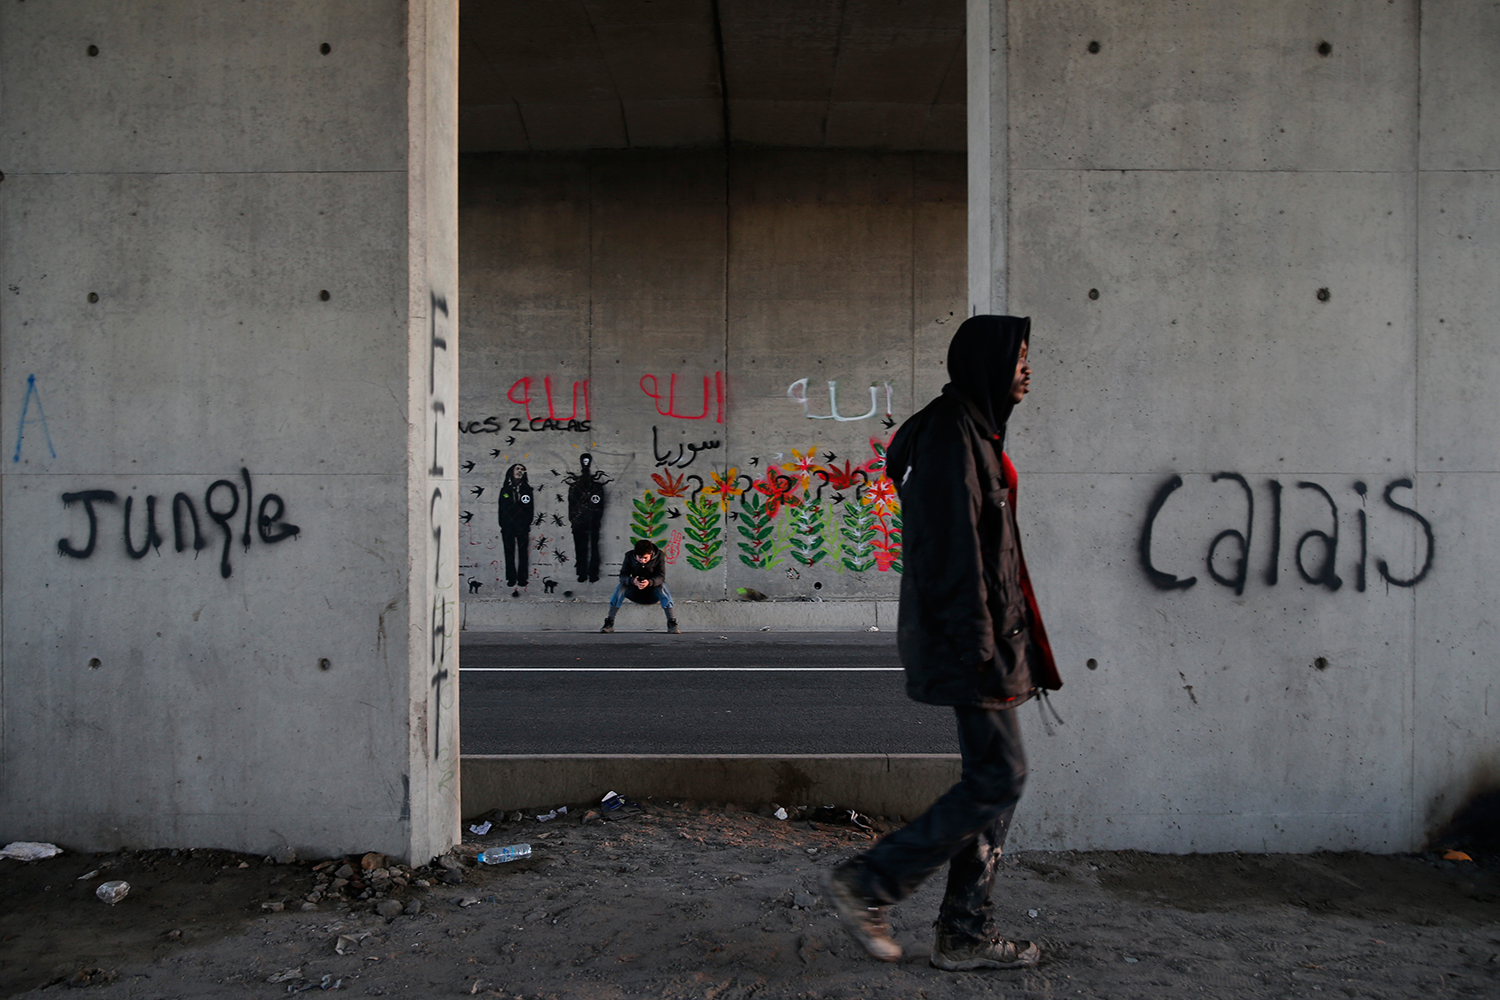 French court orders to build bathrooms in Calais migrant camps